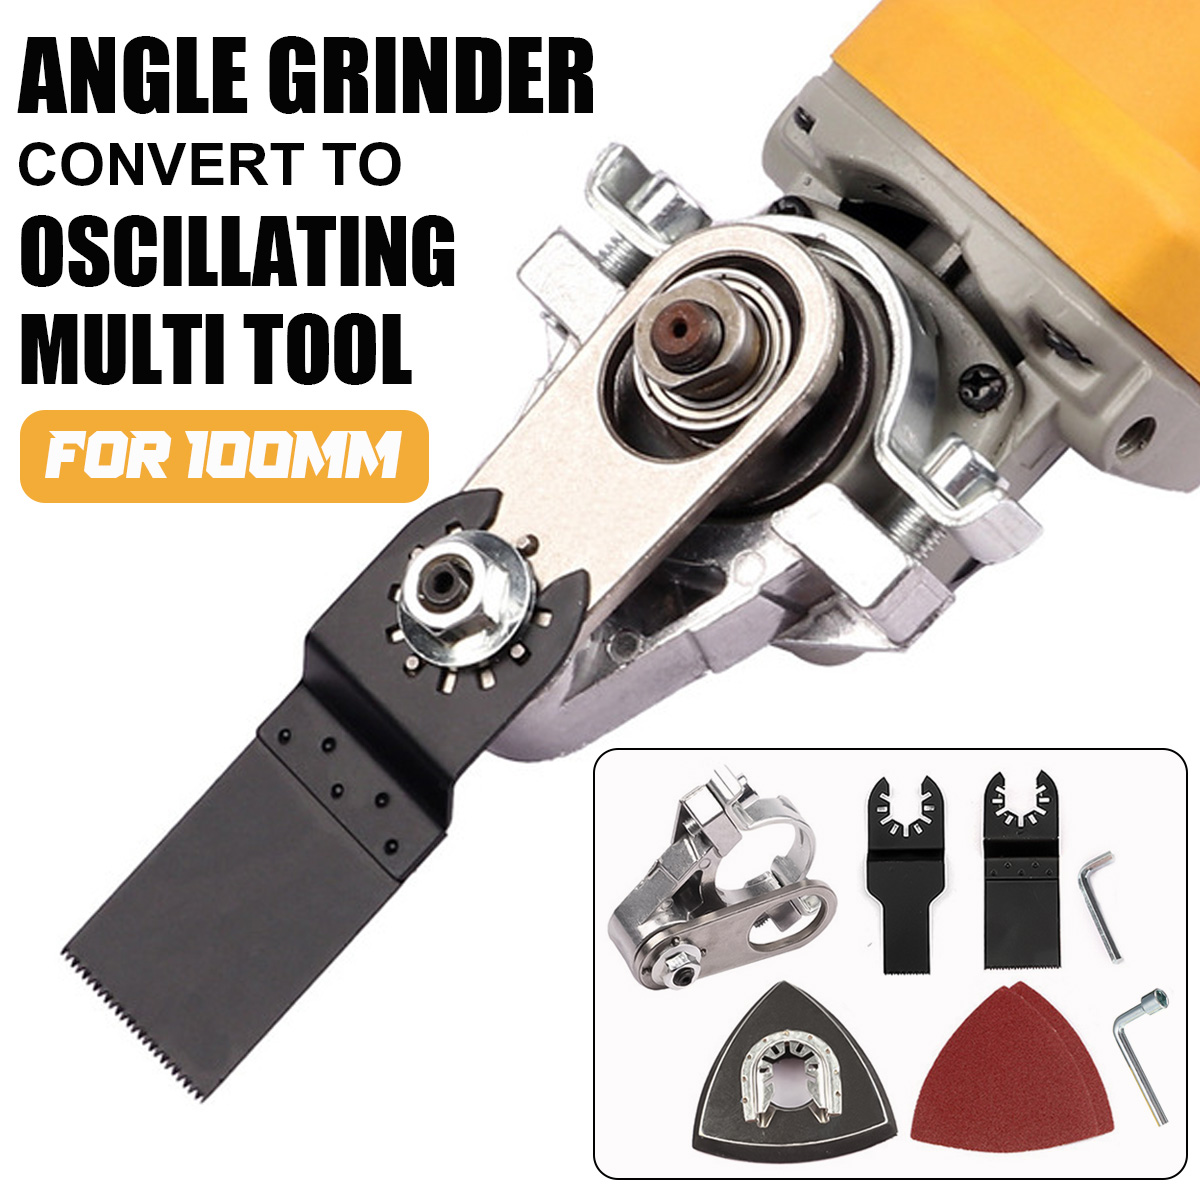 Cordless-Oscillating-Multi-Tool-Angle-Grinder-Conversion-Tool-Head-For-100mm-Angle-Grinder-1897823-13